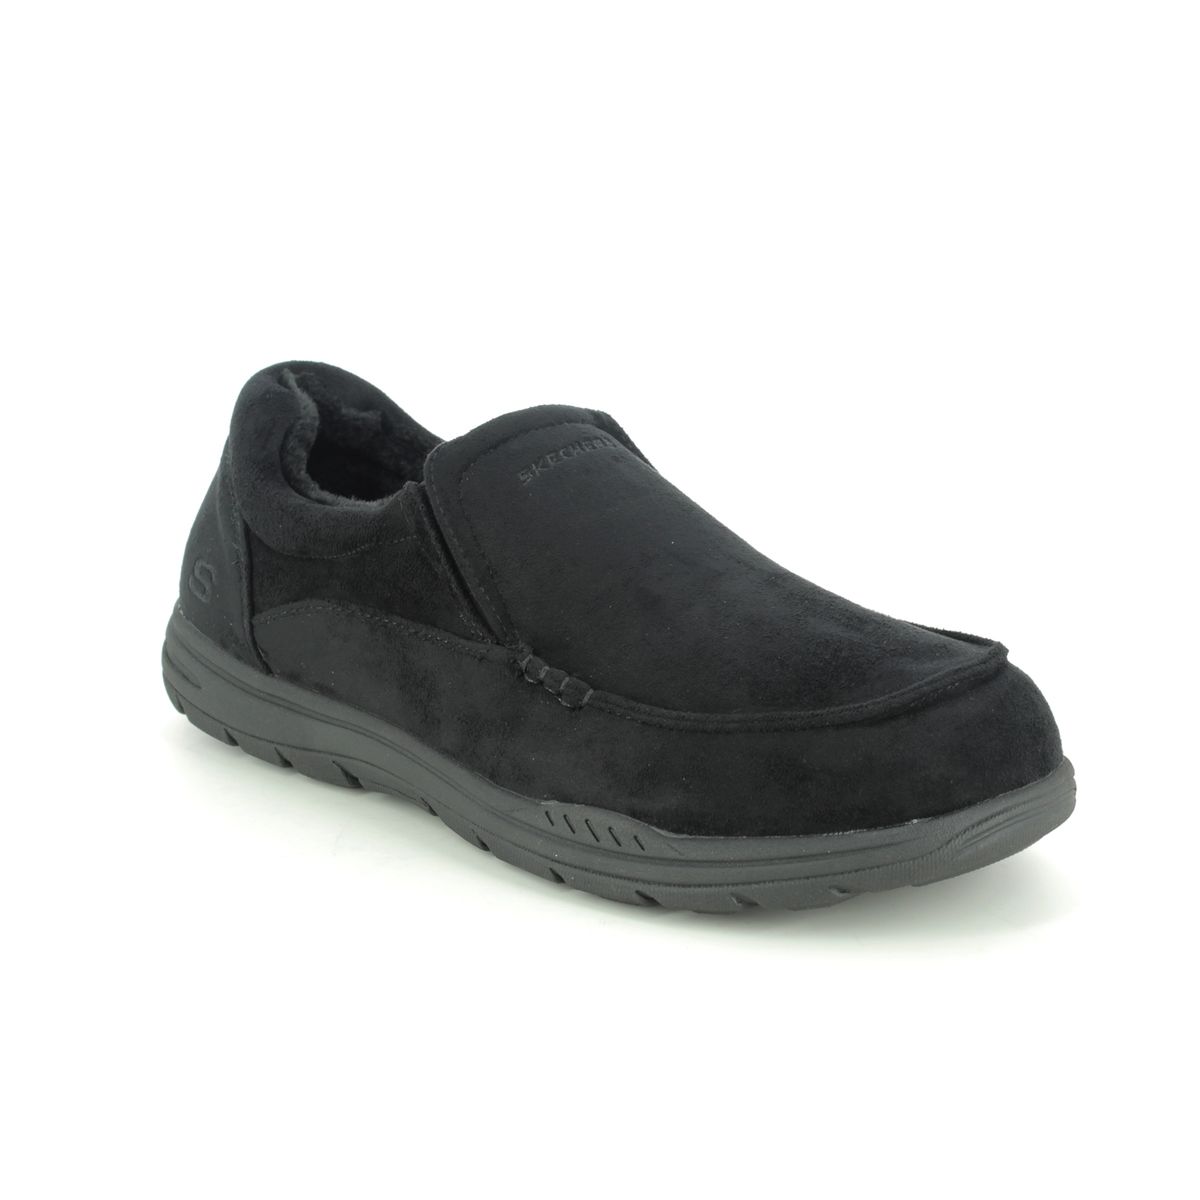 Skechers Expected X L 66445 BLK Black slippers